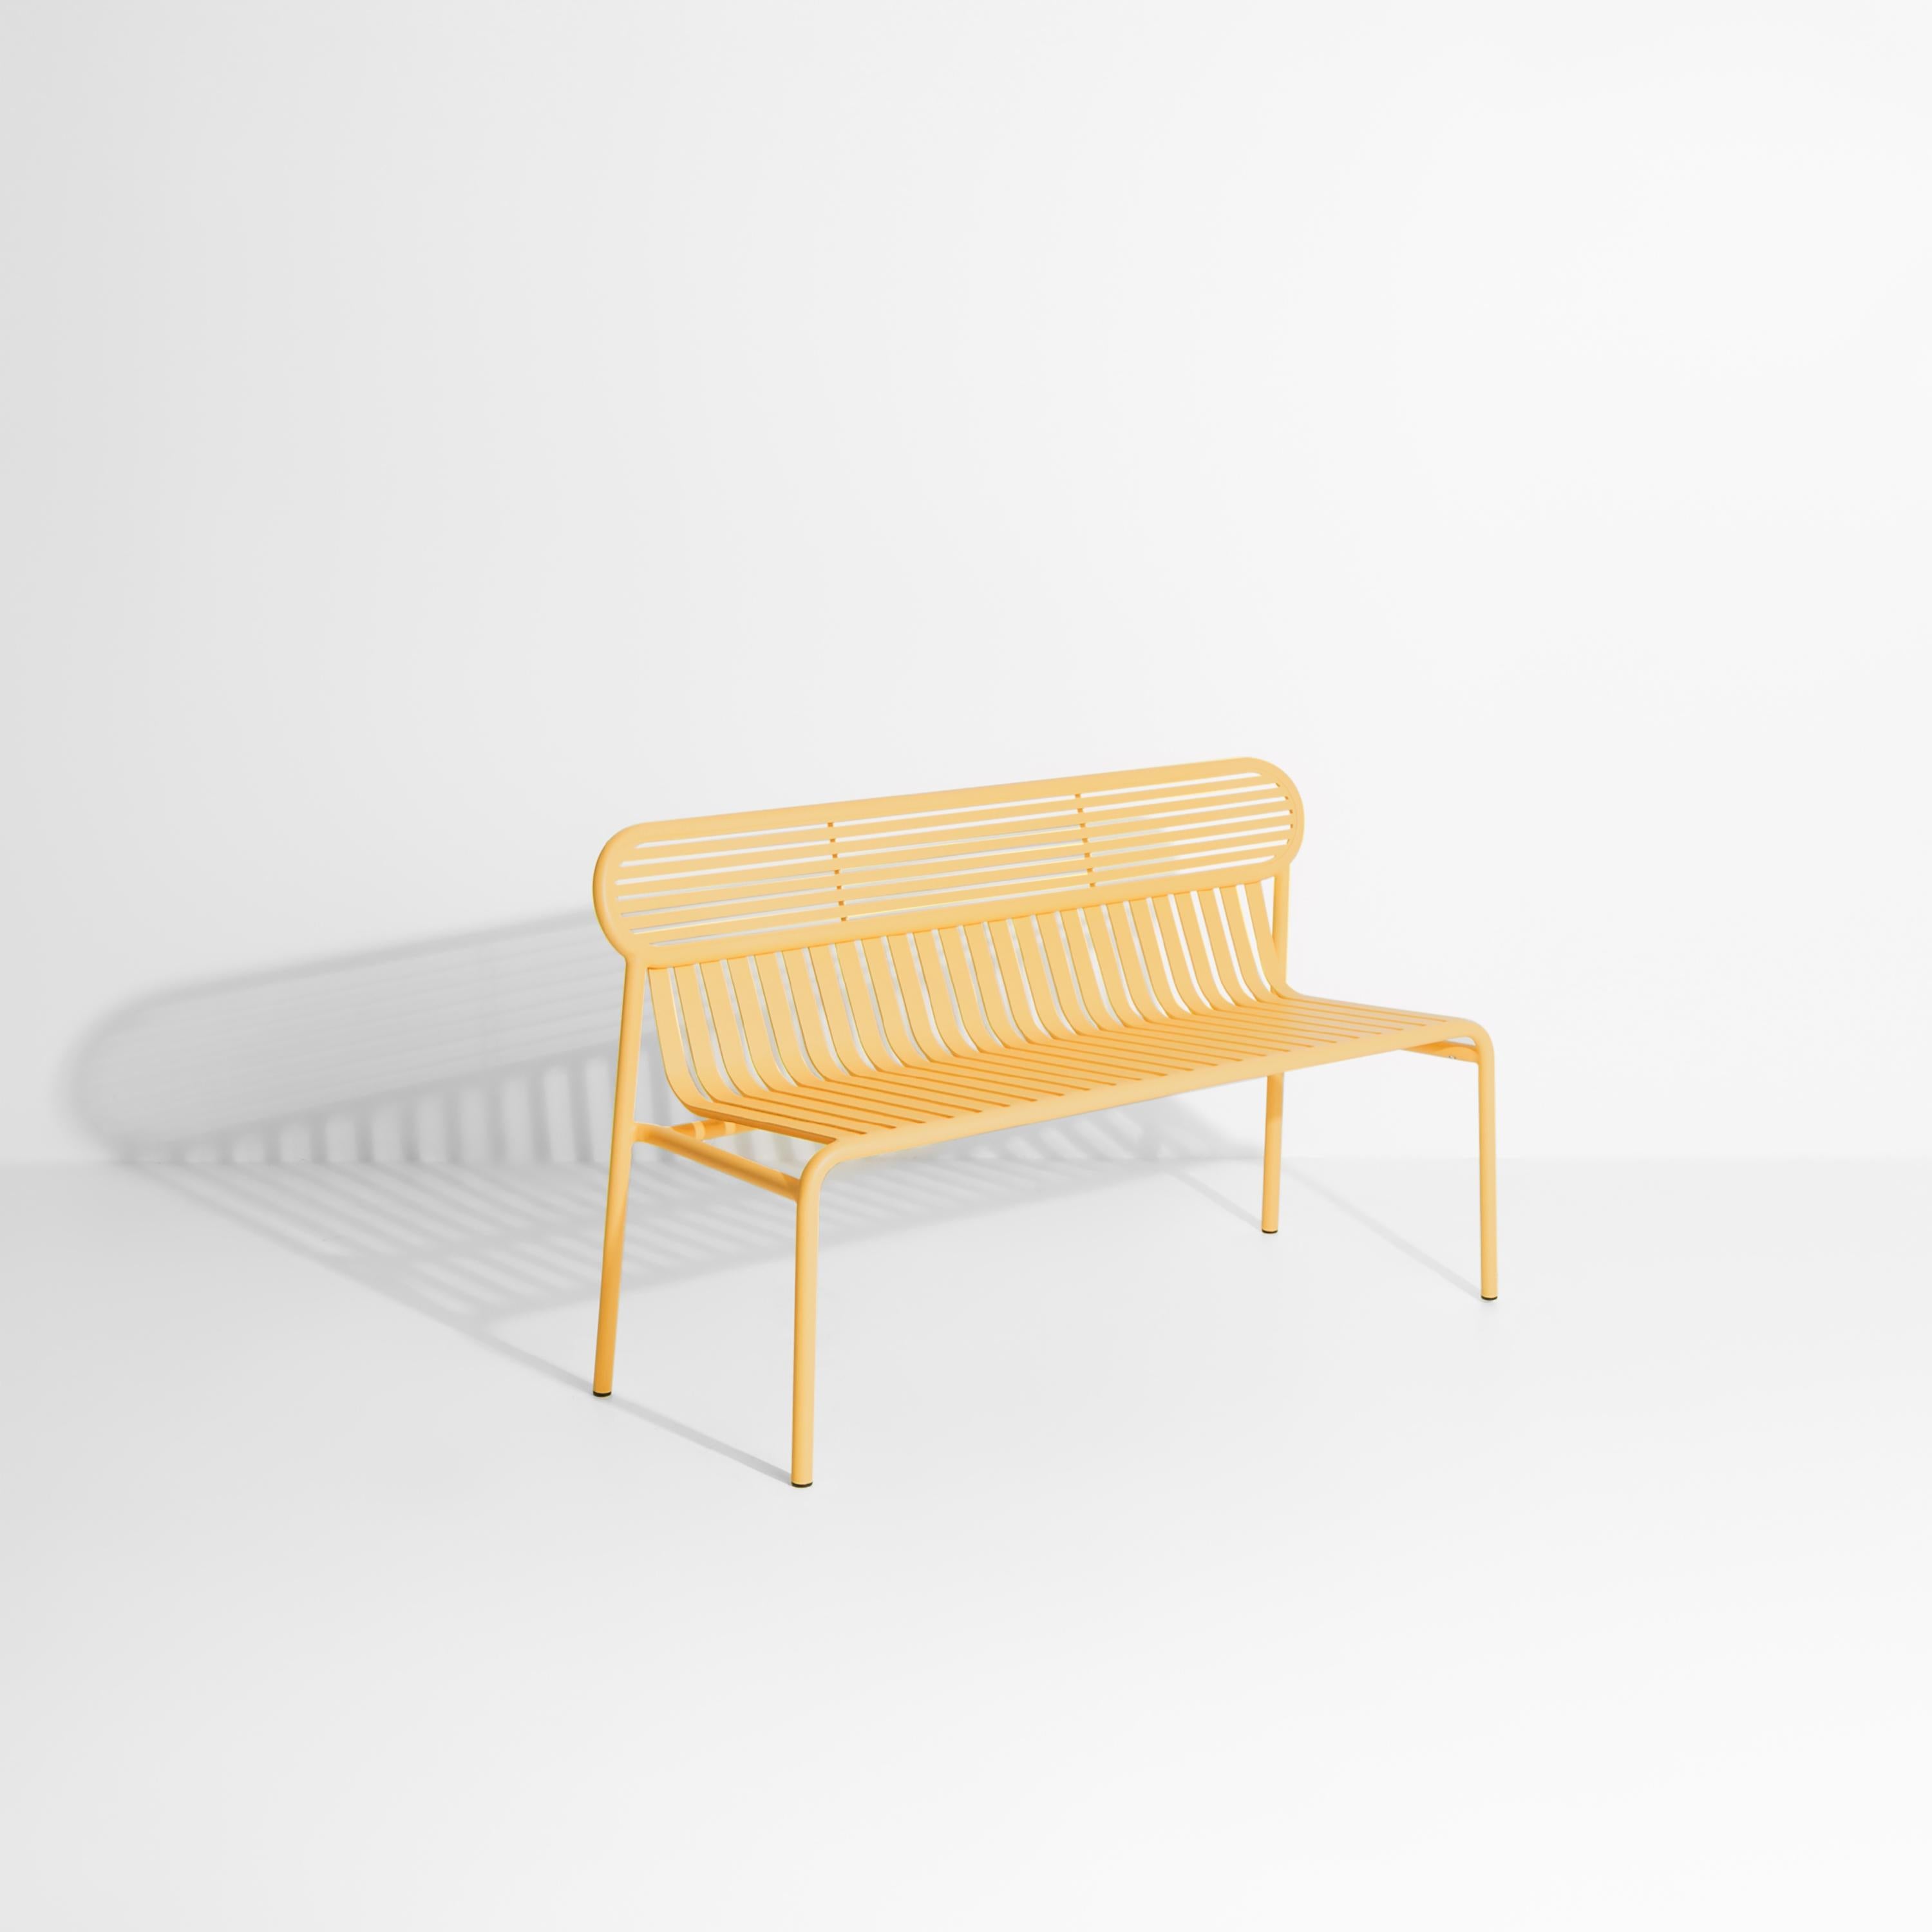 Petite Friture Week-End Bench in Saffron Aluminium by Studio BrichetZiegler, 2017

The week-end collection is a full range of outdoor furniture, in aluminium grained epoxy paint, matt finish, that includes 18 functions and 8 colours for the retail